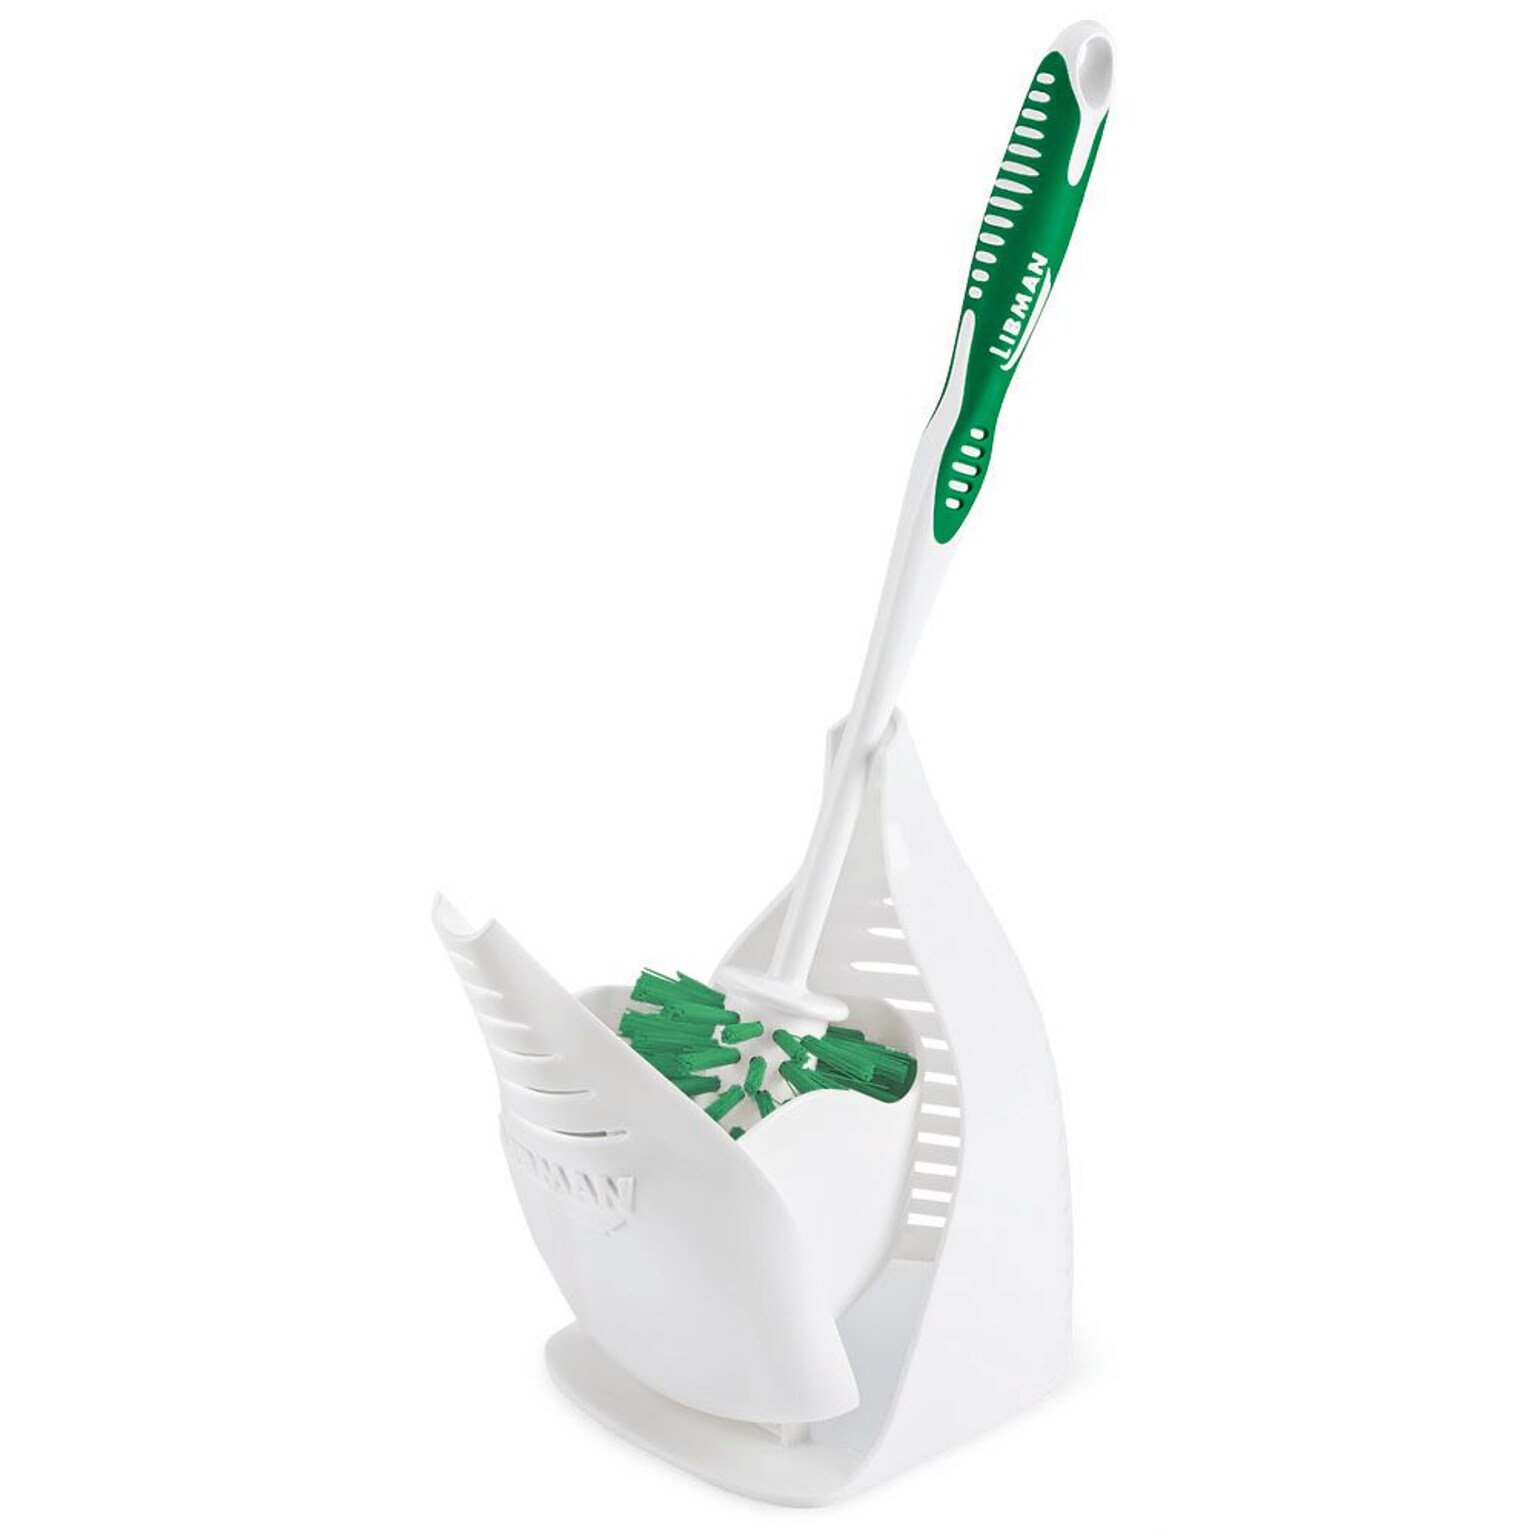 Libman Round Bowl Brush & Closed Caddy, Polypropylene, 14.5, Green & White, 4 Pack, (0040)